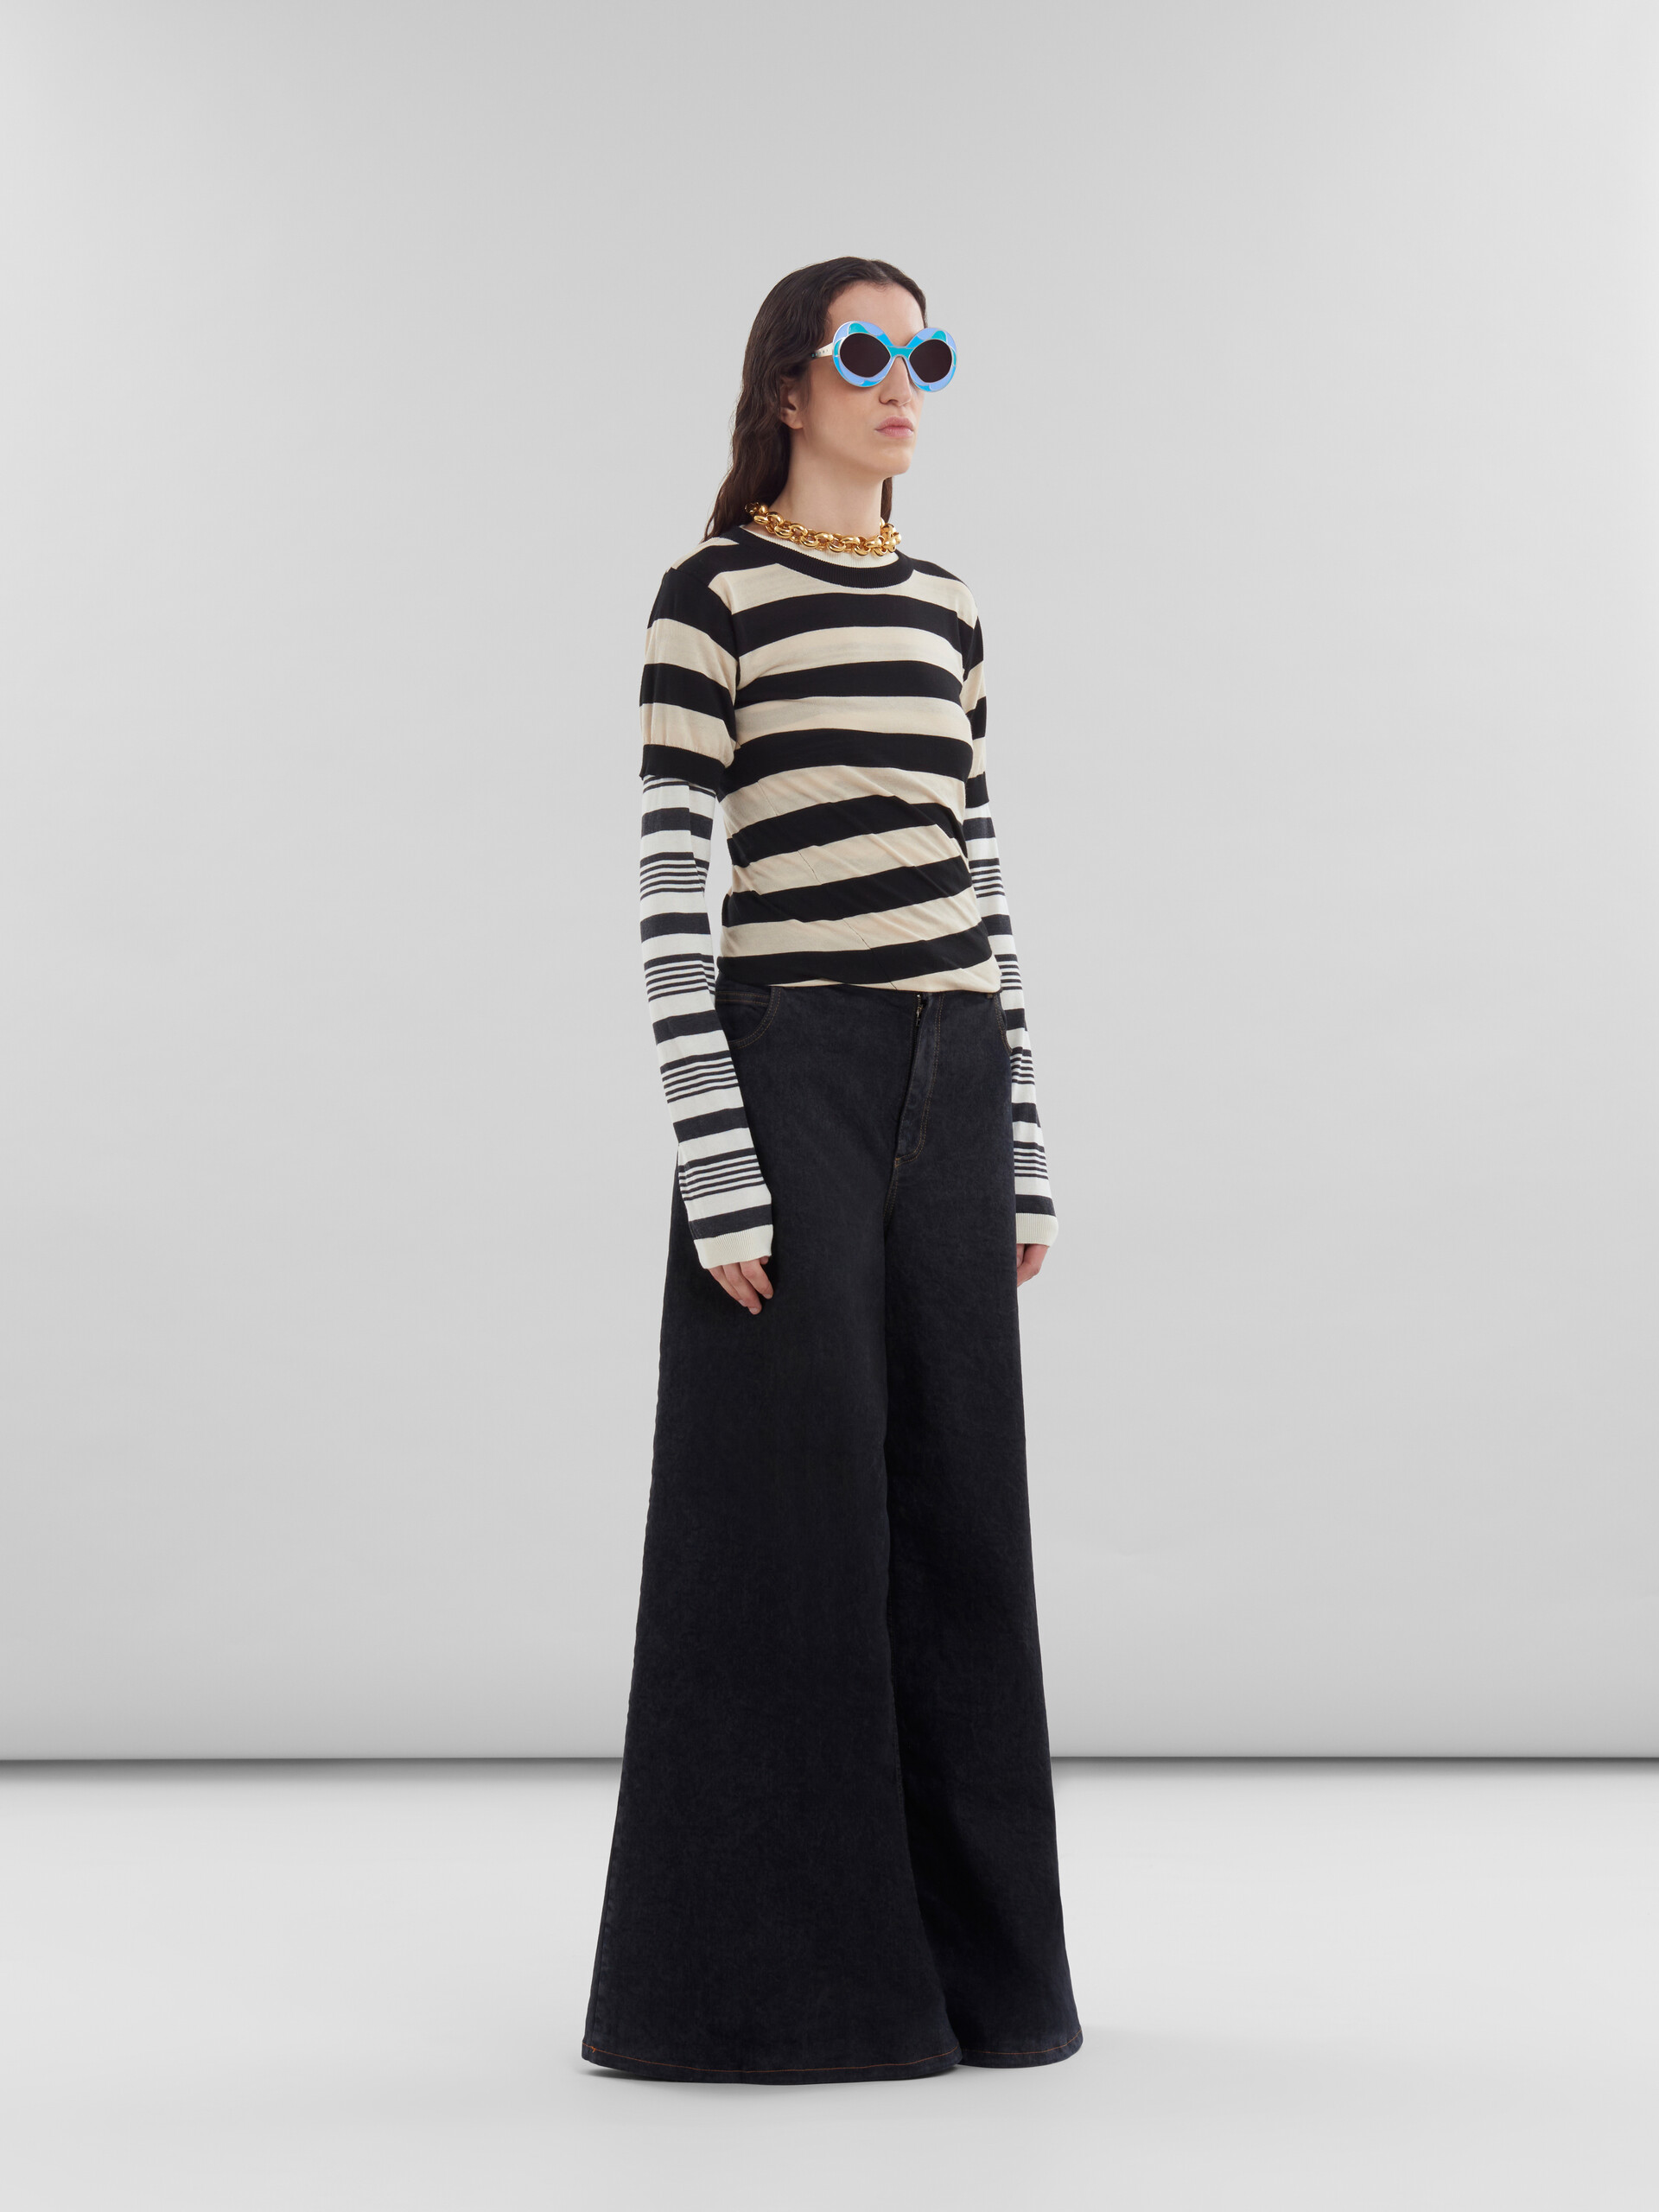 Black and white layered cotton crew-neck with contrast stripes - Pullovers - Image 5